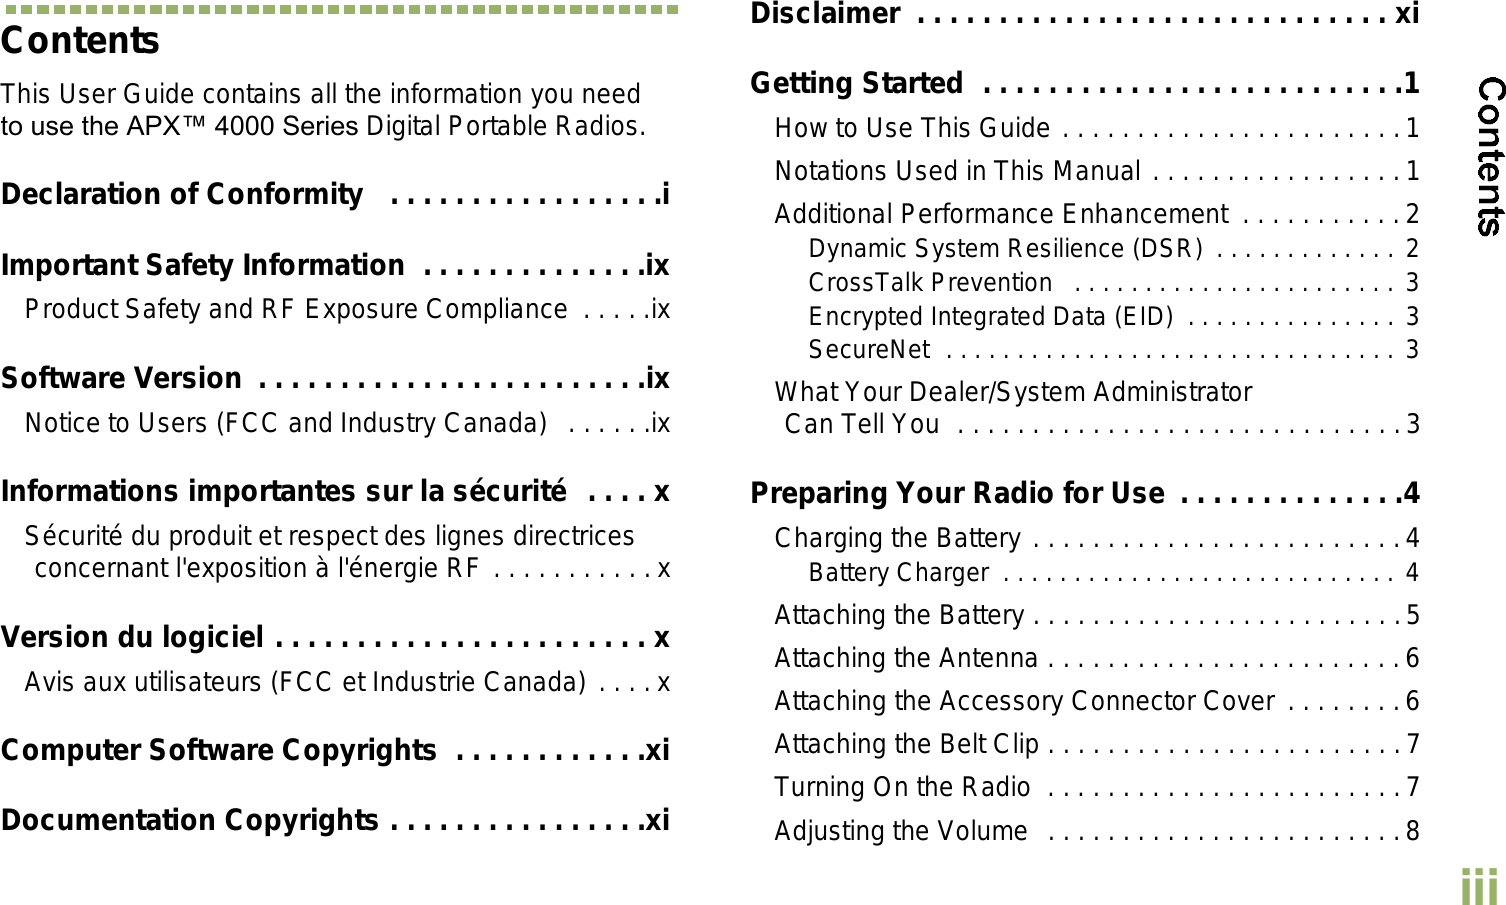 EnglishiiiContentsThis User Guide contains all the information you need to use the APX 4000 Series Digital Portable Radios.Declaration of Conformity   . . . . . . . . . . . . . . . . .iImportant Safety Information  . . . . . . . . . . . . . .ixProduct Safety and RF Exposure Compliance  . . . . .ixSoftware Version  . . . . . . . . . . . . . . . . . . . . . . . .ixNotice to Users (FCC and Industry Canada)   . . . . . .ixInformations importantes sur la sécurité  . . . . xSécurité du produit et respect des lignes directrices concernant l&apos;exposition à l&apos;énergie RF . . . . . . . . . . .xVersion du logiciel . . . . . . . . . . . . . . . . . . . . . . . xAvis aux utilisateurs (FCC et Industrie Canada) . . . .xComputer Software Copyrights  . . . . . . . . . . . .xiDocumentation Copyrights . . . . . . . . . . . . . . . .xiDisclaimer  . . . . . . . . . . . . . . . . . . . . . . . . . . . . . xiGetting Started  . . . . . . . . . . . . . . . . . . . . . . . . . .1How to Use This Guide . . . . . . . . . . . . . . . . . . . . . . .1Notations Used in This Manual . . . . . . . . . . . . . . . . .1Additional Performance Enhancement  . . . . . . . . . . .2Dynamic System Resilience (DSR)  . . . . . . . . . . . . . 2CrossTalk Prevention   . . . . . . . . . . . . . . . . . . . . . . . 3Encrypted Integrated Data (EID)  . . . . . . . . . . . . . . . 3SecureNet  . . . . . . . . . . . . . . . . . . . . . . . . . . . . . . . . 3What Your Dealer/System AdministratorCan Tell You  . . . . . . . . . . . . . . . . . . . . . . . . . . . . . .3Preparing Your Radio for Use  . . . . . . . . . . . . . .4Charging the Battery . . . . . . . . . . . . . . . . . . . . . . . . .4Battery Charger  . . . . . . . . . . . . . . . . . . . . . . . . . . . . 4Attaching the Battery . . . . . . . . . . . . . . . . . . . . . . . . .5Attaching the Antenna . . . . . . . . . . . . . . . . . . . . . . . .6Attaching the Accessory Connector Cover . . . . . . . .6Attaching the Belt Clip . . . . . . . . . . . . . . . . . . . . . . . .7Turning On the Radio  . . . . . . . . . . . . . . . . . . . . . . . .7Adjusting the Volume  . . . . . . . . . . . . . . . . . . . . . . . .8